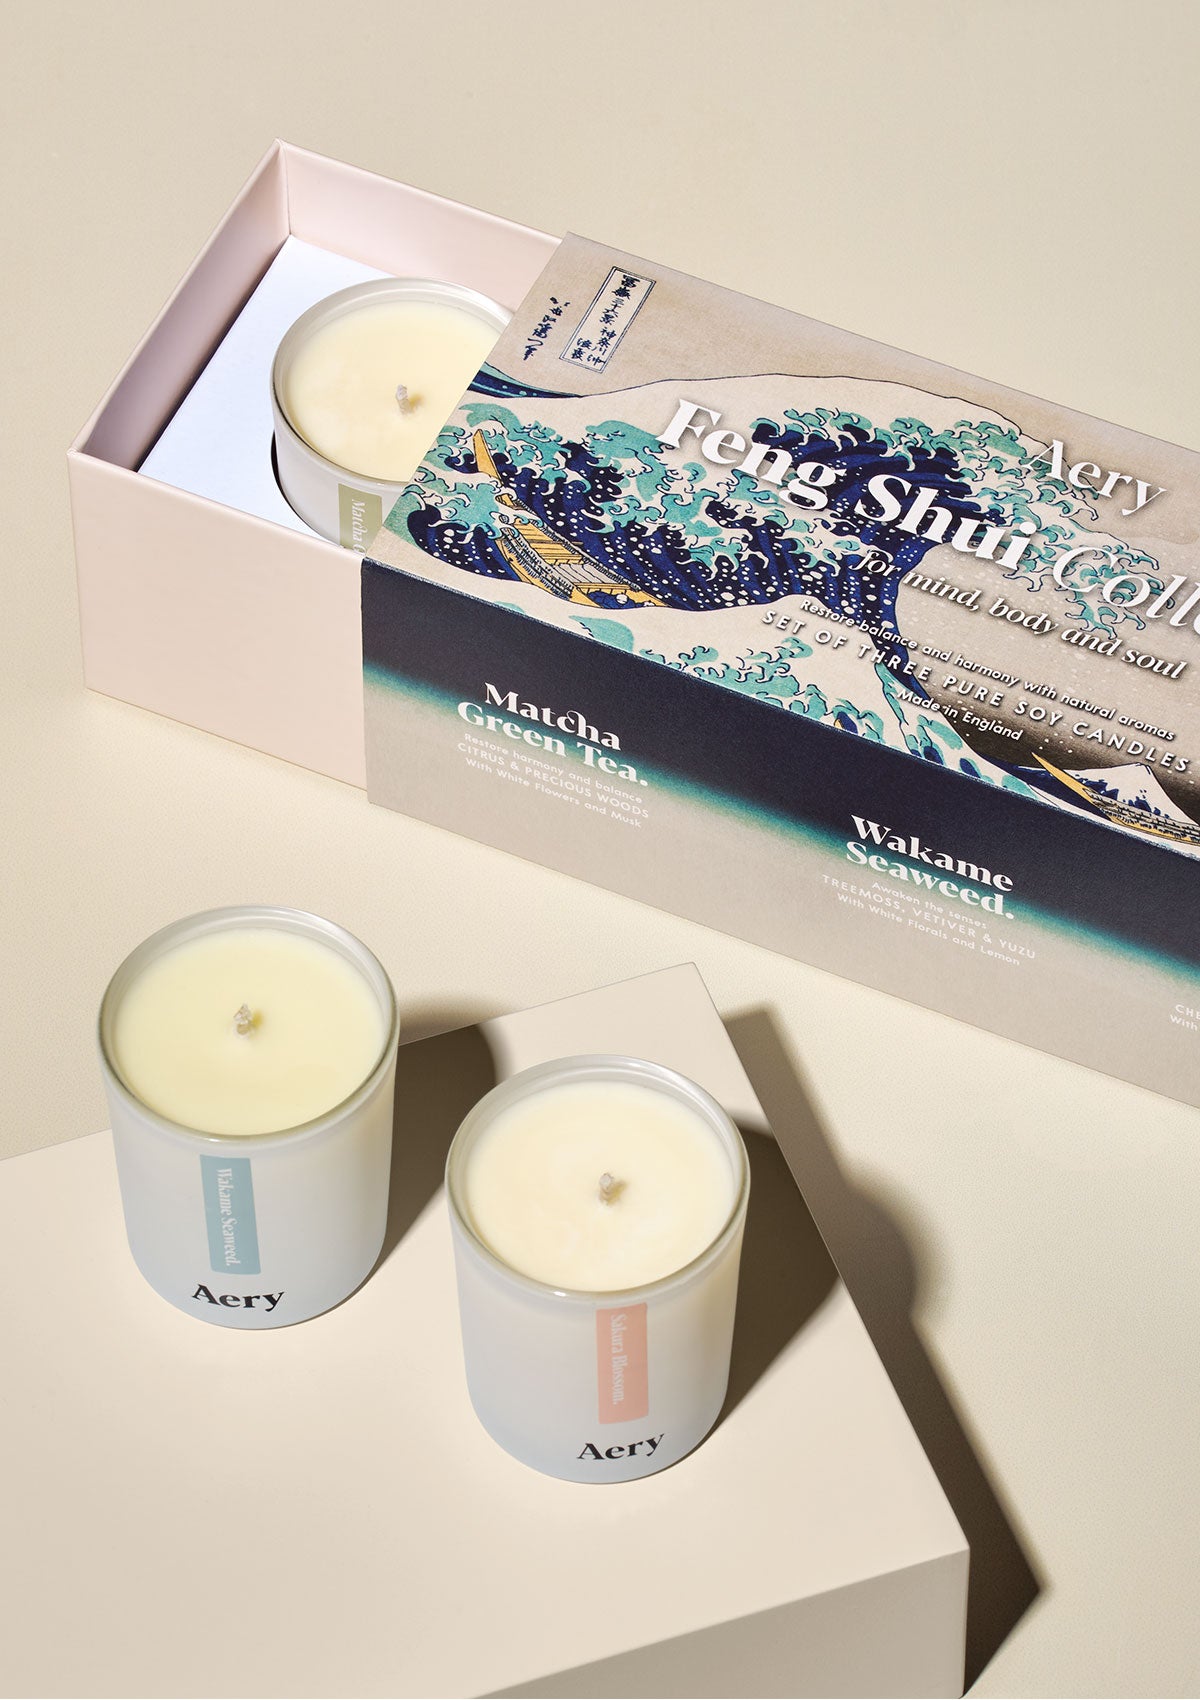 tokyo scented candle giftset displayed on a cream background